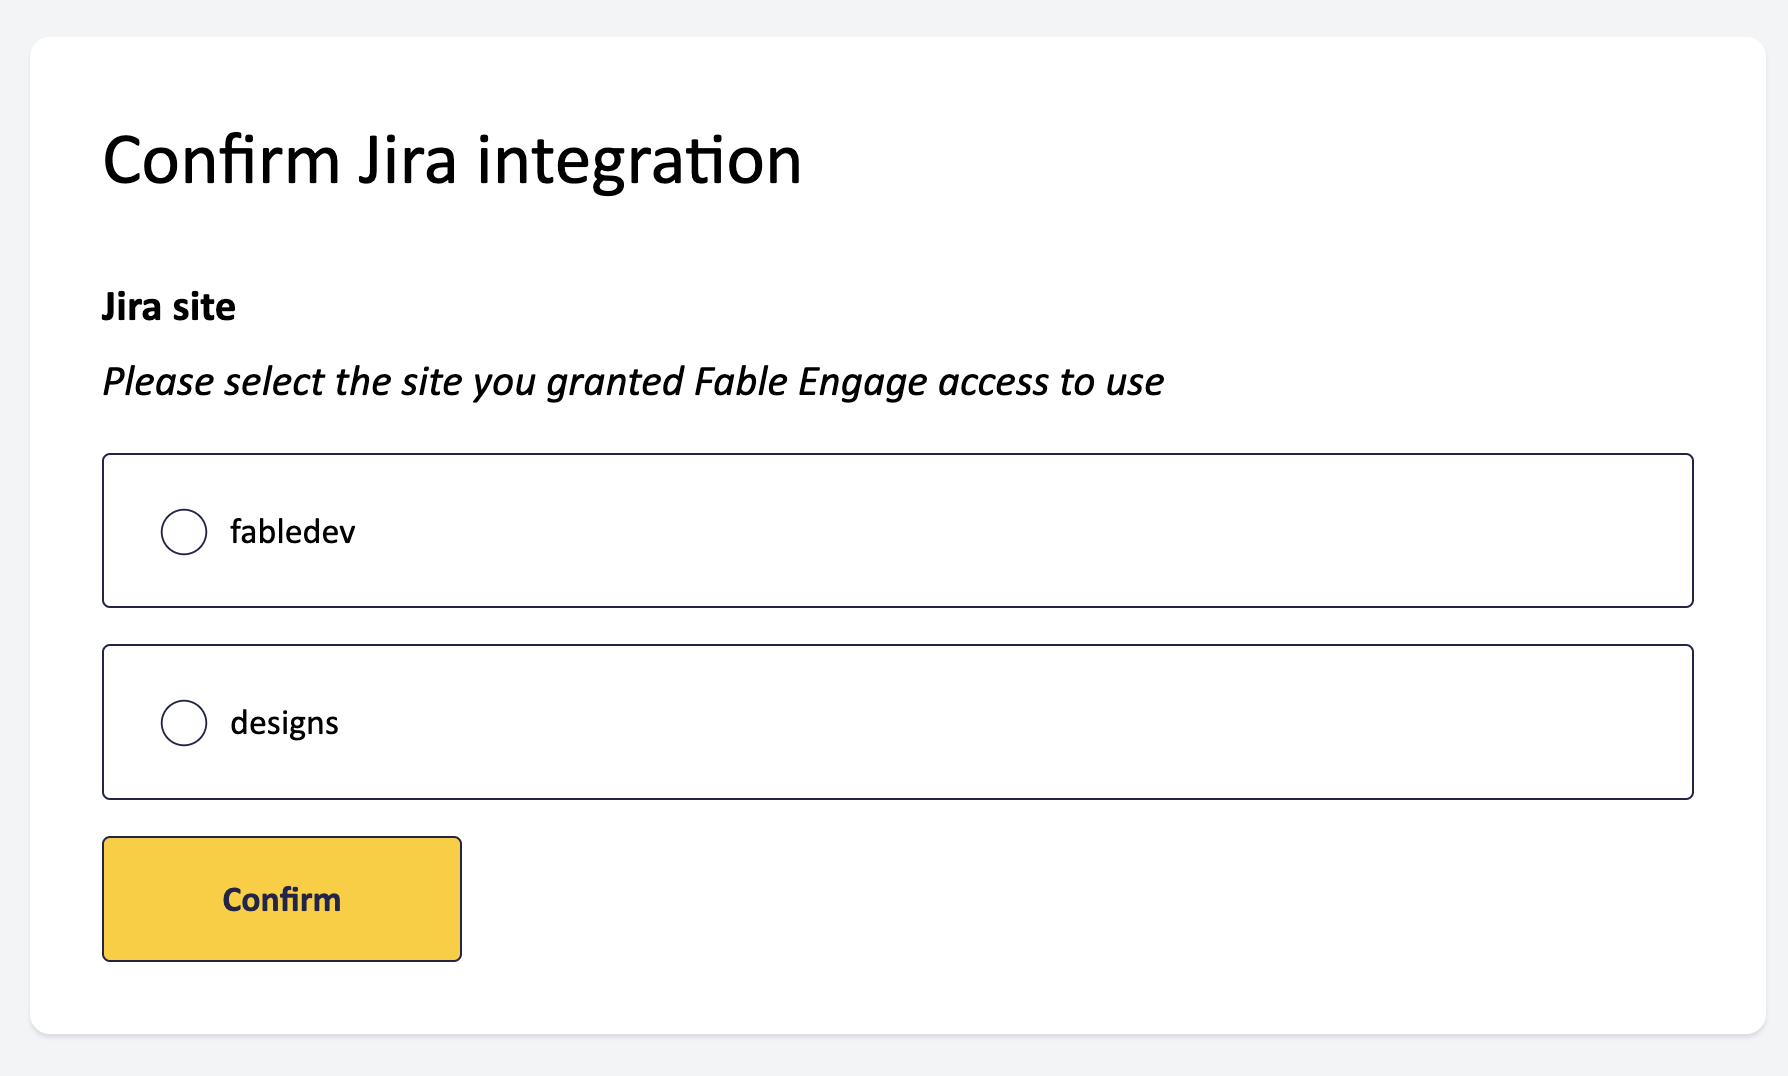 Screenshot of the confirm integration page with radio options to select from a list of Jira instances to integration with Fable.